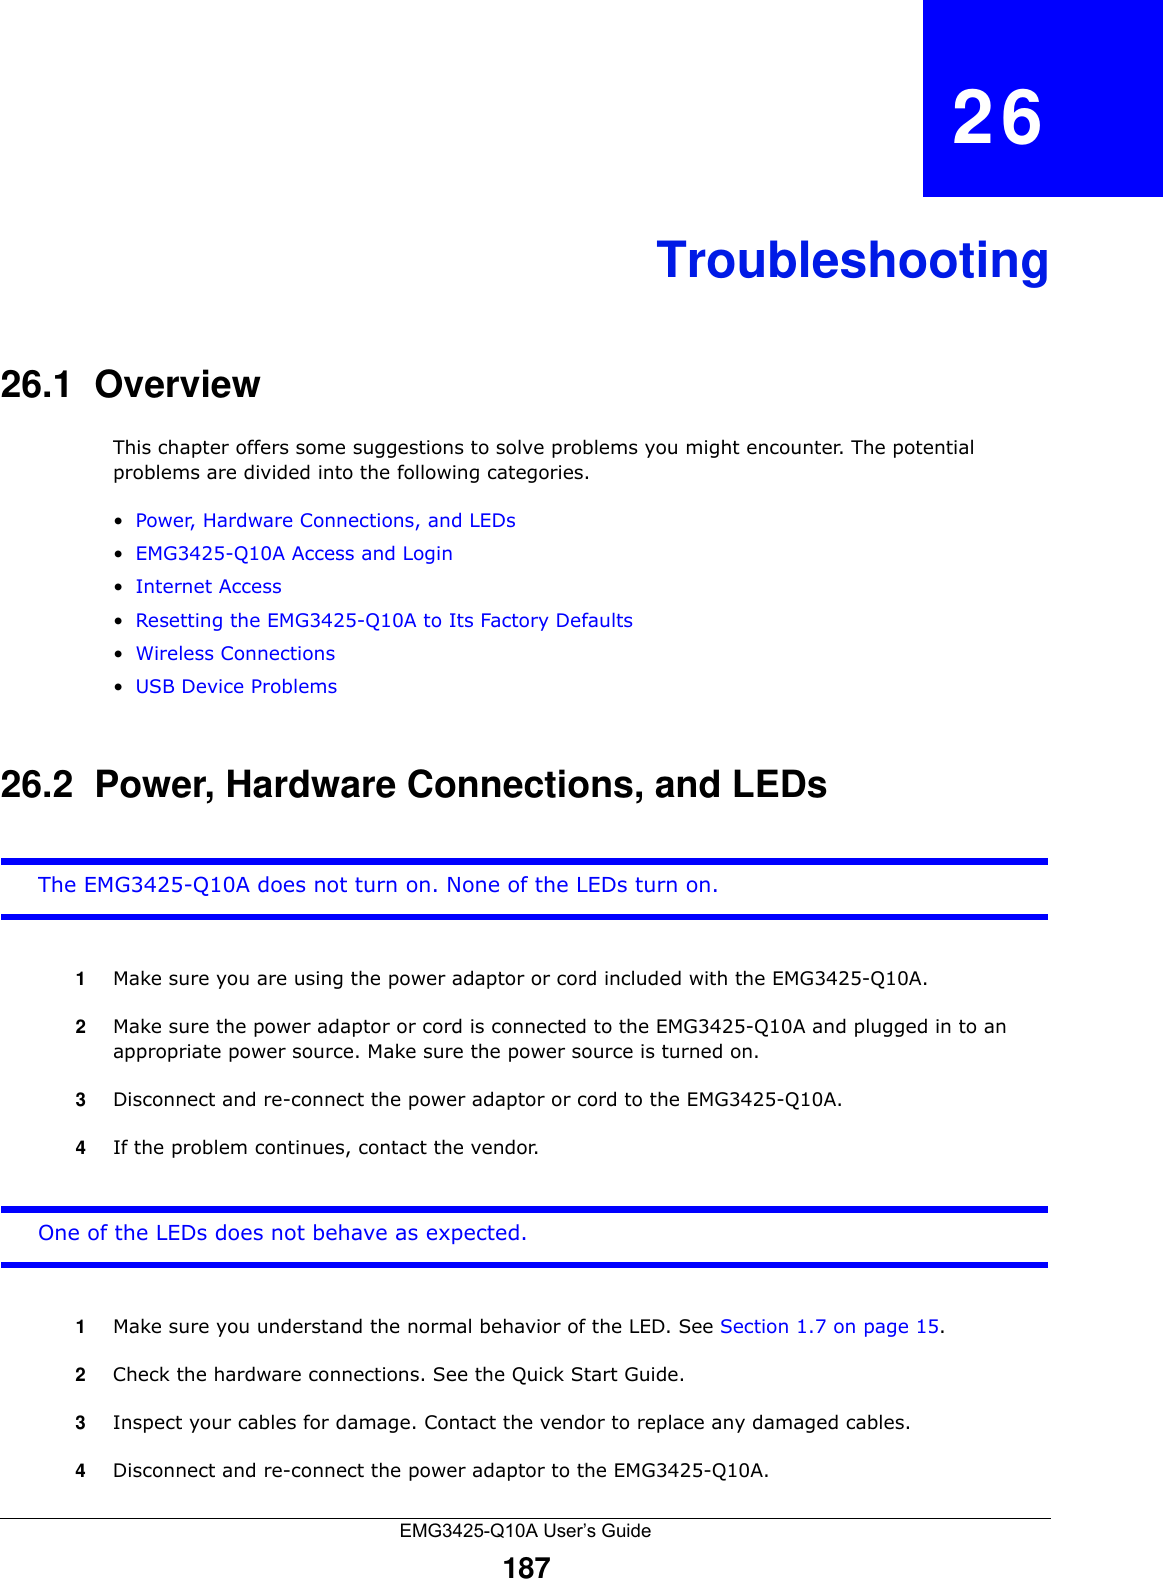 EMG3425-Q10A User’s Guide187CHAPTER   26Troubleshooting26.1  OverviewThis chapter offers some suggestions to solve problems you might encounter. The potential problems are divided into the following categories. •Power, Hardware Connections, and LEDs•EMG3425-Q10A Access and Login•Internet Access•Resetting the EMG3425-Q10A to Its Factory Defaults•Wireless Connections•USB Device Problems26.2  Power, Hardware Connections, and LEDsThe EMG3425-Q10A does not turn on. None of the LEDs turn on.1Make sure you are using the power adaptor or cord included with the EMG3425-Q10A.2Make sure the power adaptor or cord is connected to the EMG3425-Q10A and plugged in to an appropriate power source. Make sure the power source is turned on.3Disconnect and re-connect the power adaptor or cord to the EMG3425-Q10A.4If the problem continues, contact the vendor.One of the LEDs does not behave as expected.1Make sure you understand the normal behavior of the LED. See Section 1.7 on page 15.2Check the hardware connections. See the Quick Start Guide. 3Inspect your cables for damage. Contact the vendor to replace any damaged cables.4Disconnect and re-connect the power adaptor to the EMG3425-Q10A. 